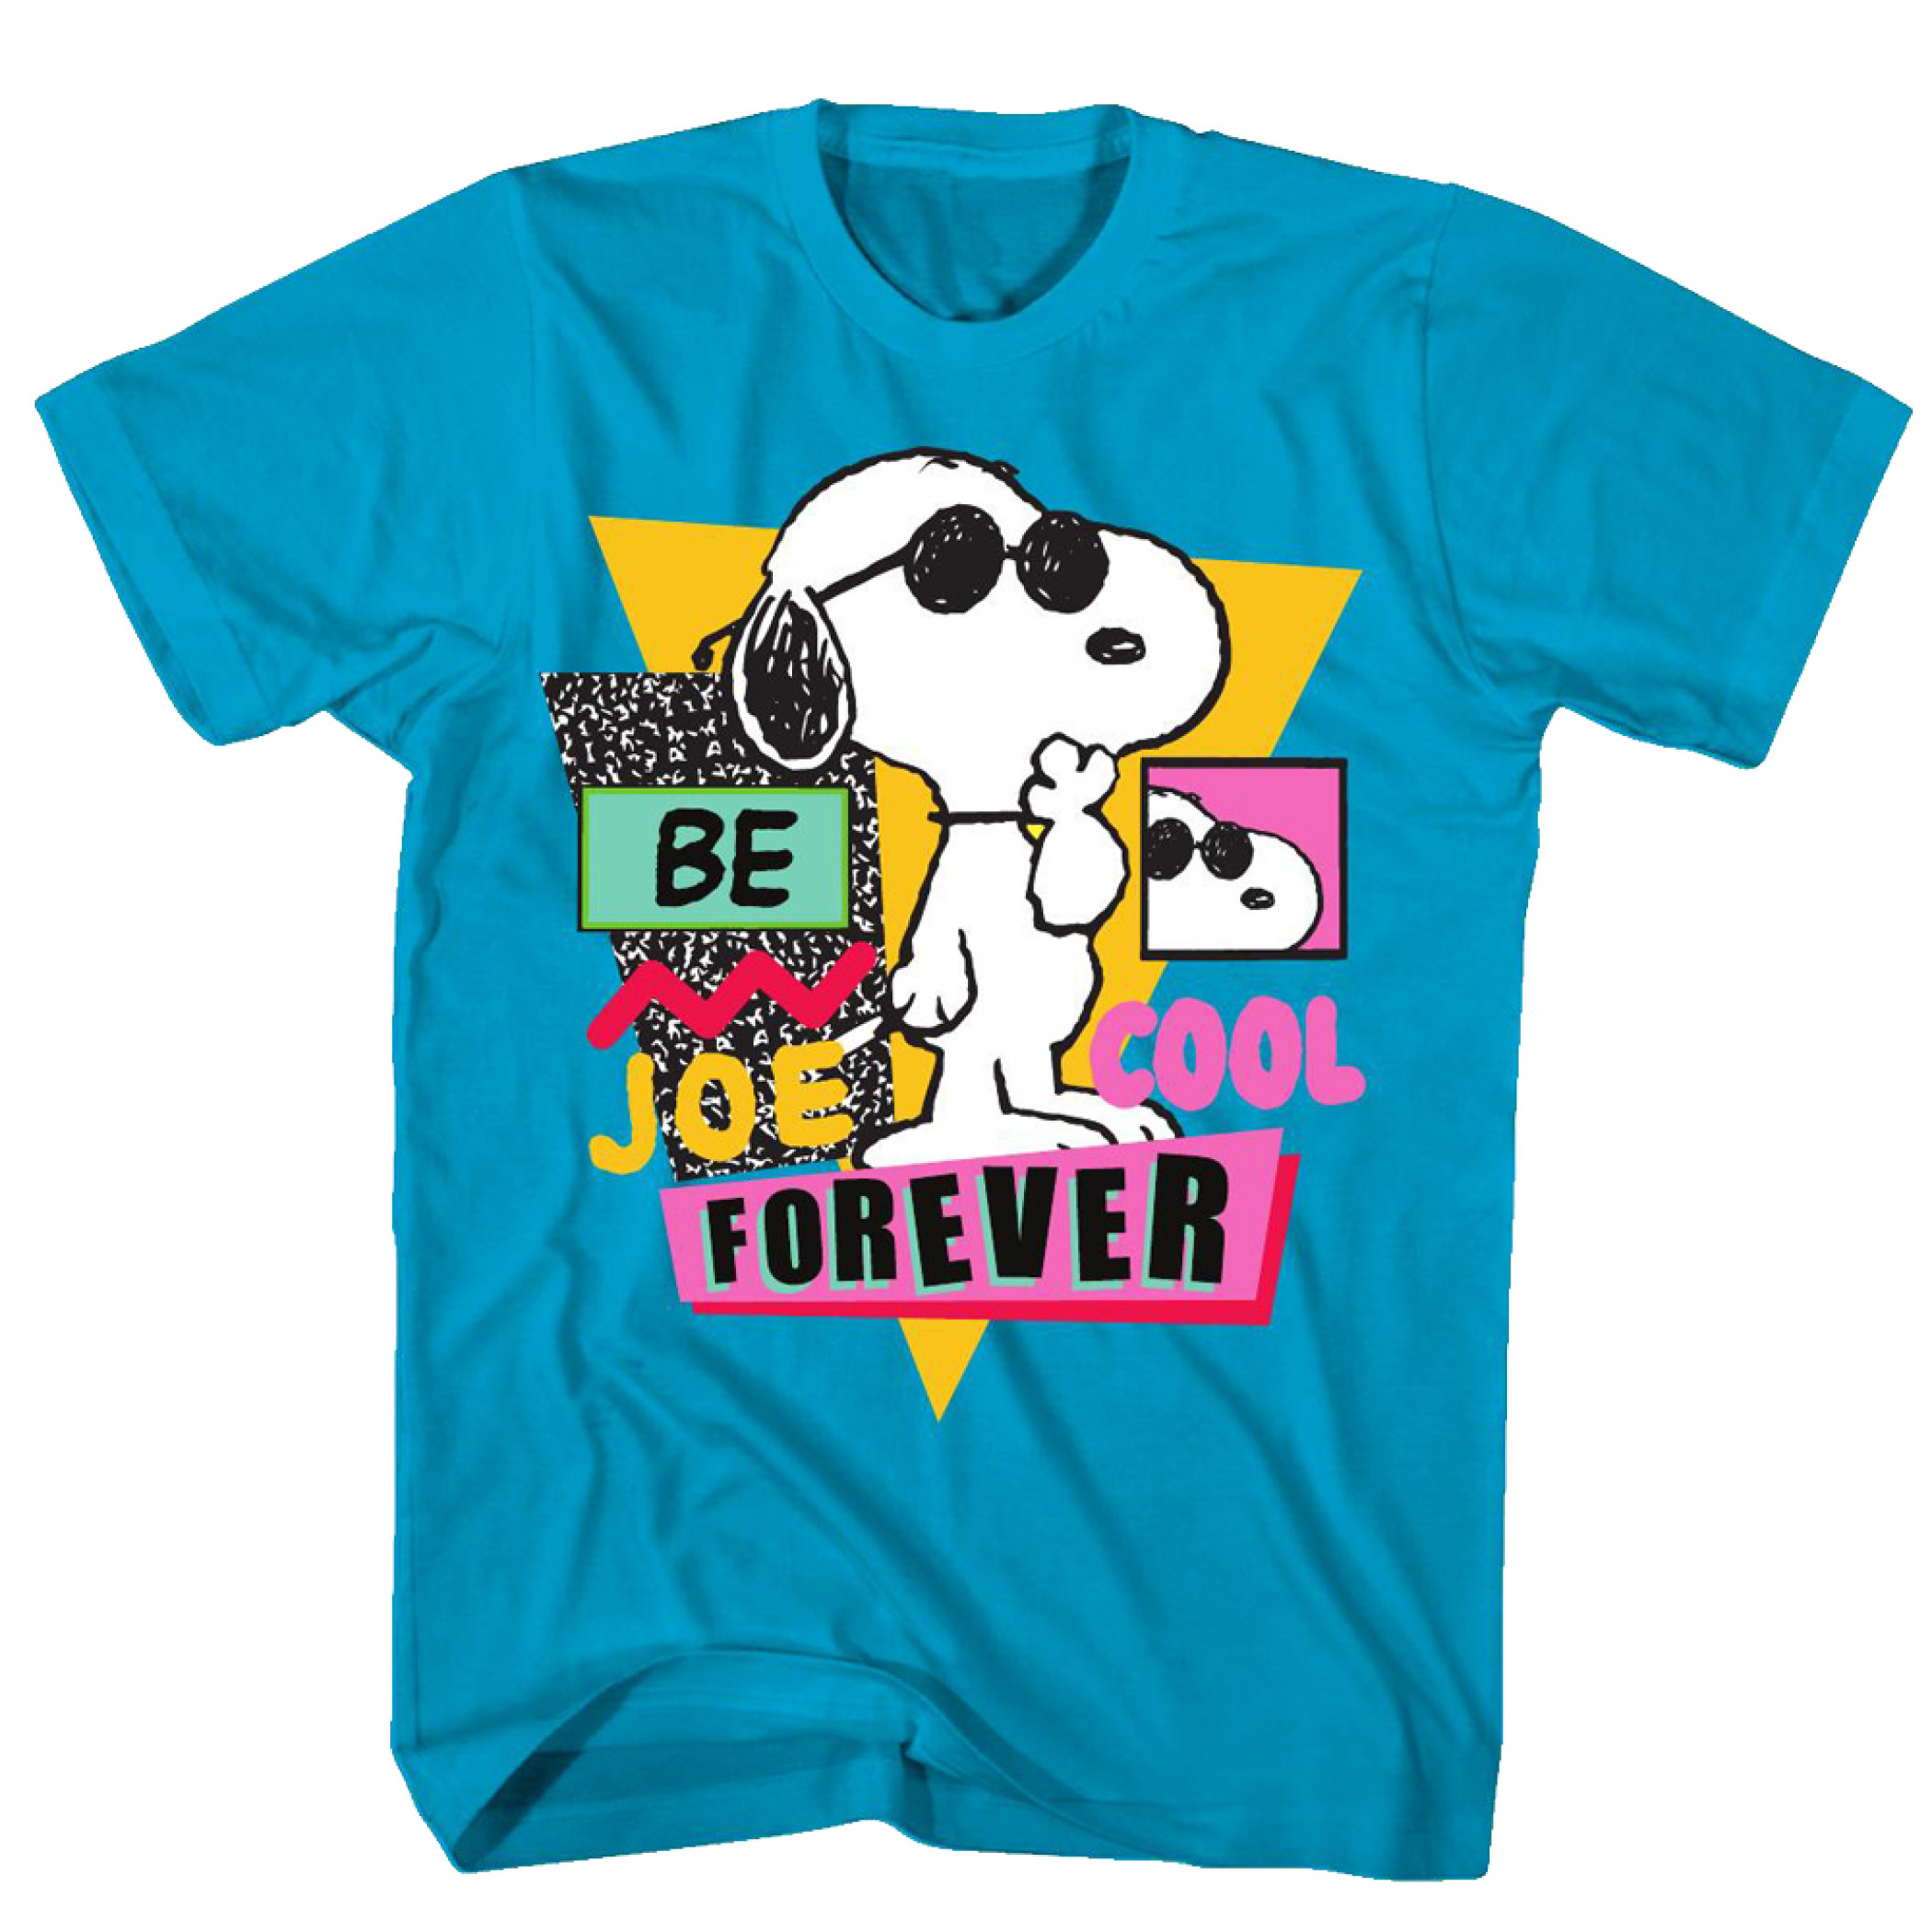 Peanuts Snoopy Dog Be Joe Cool Forever T-Shirt